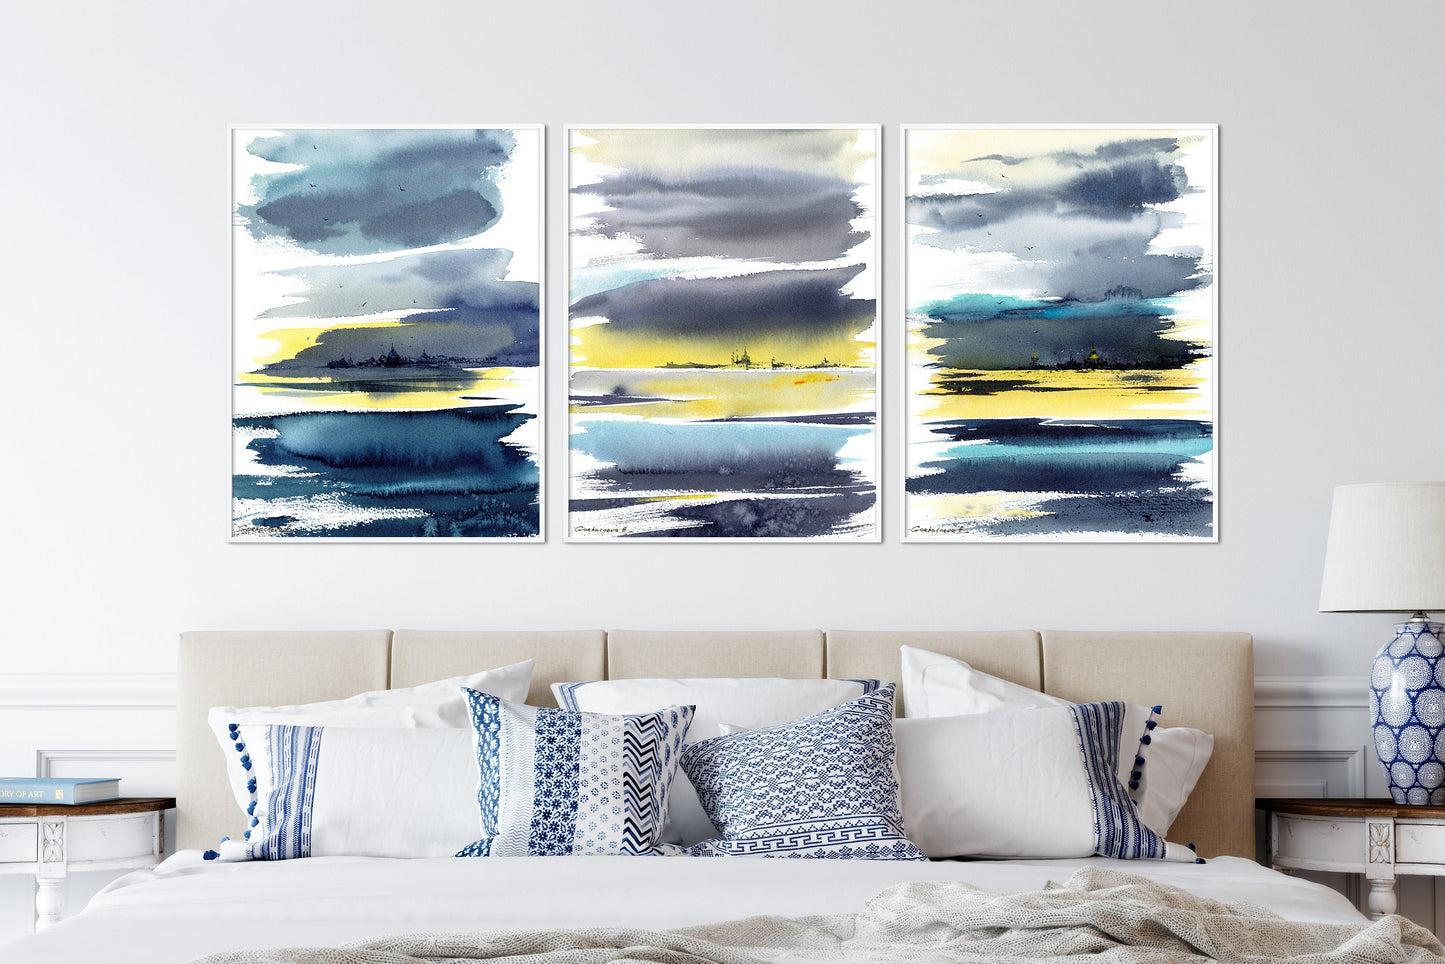 Abstract City Set Of 3 Art Prints, Ghost Town On Water, Modern Art, Yellow, Blue, Gray, Print Of Original Watercolor